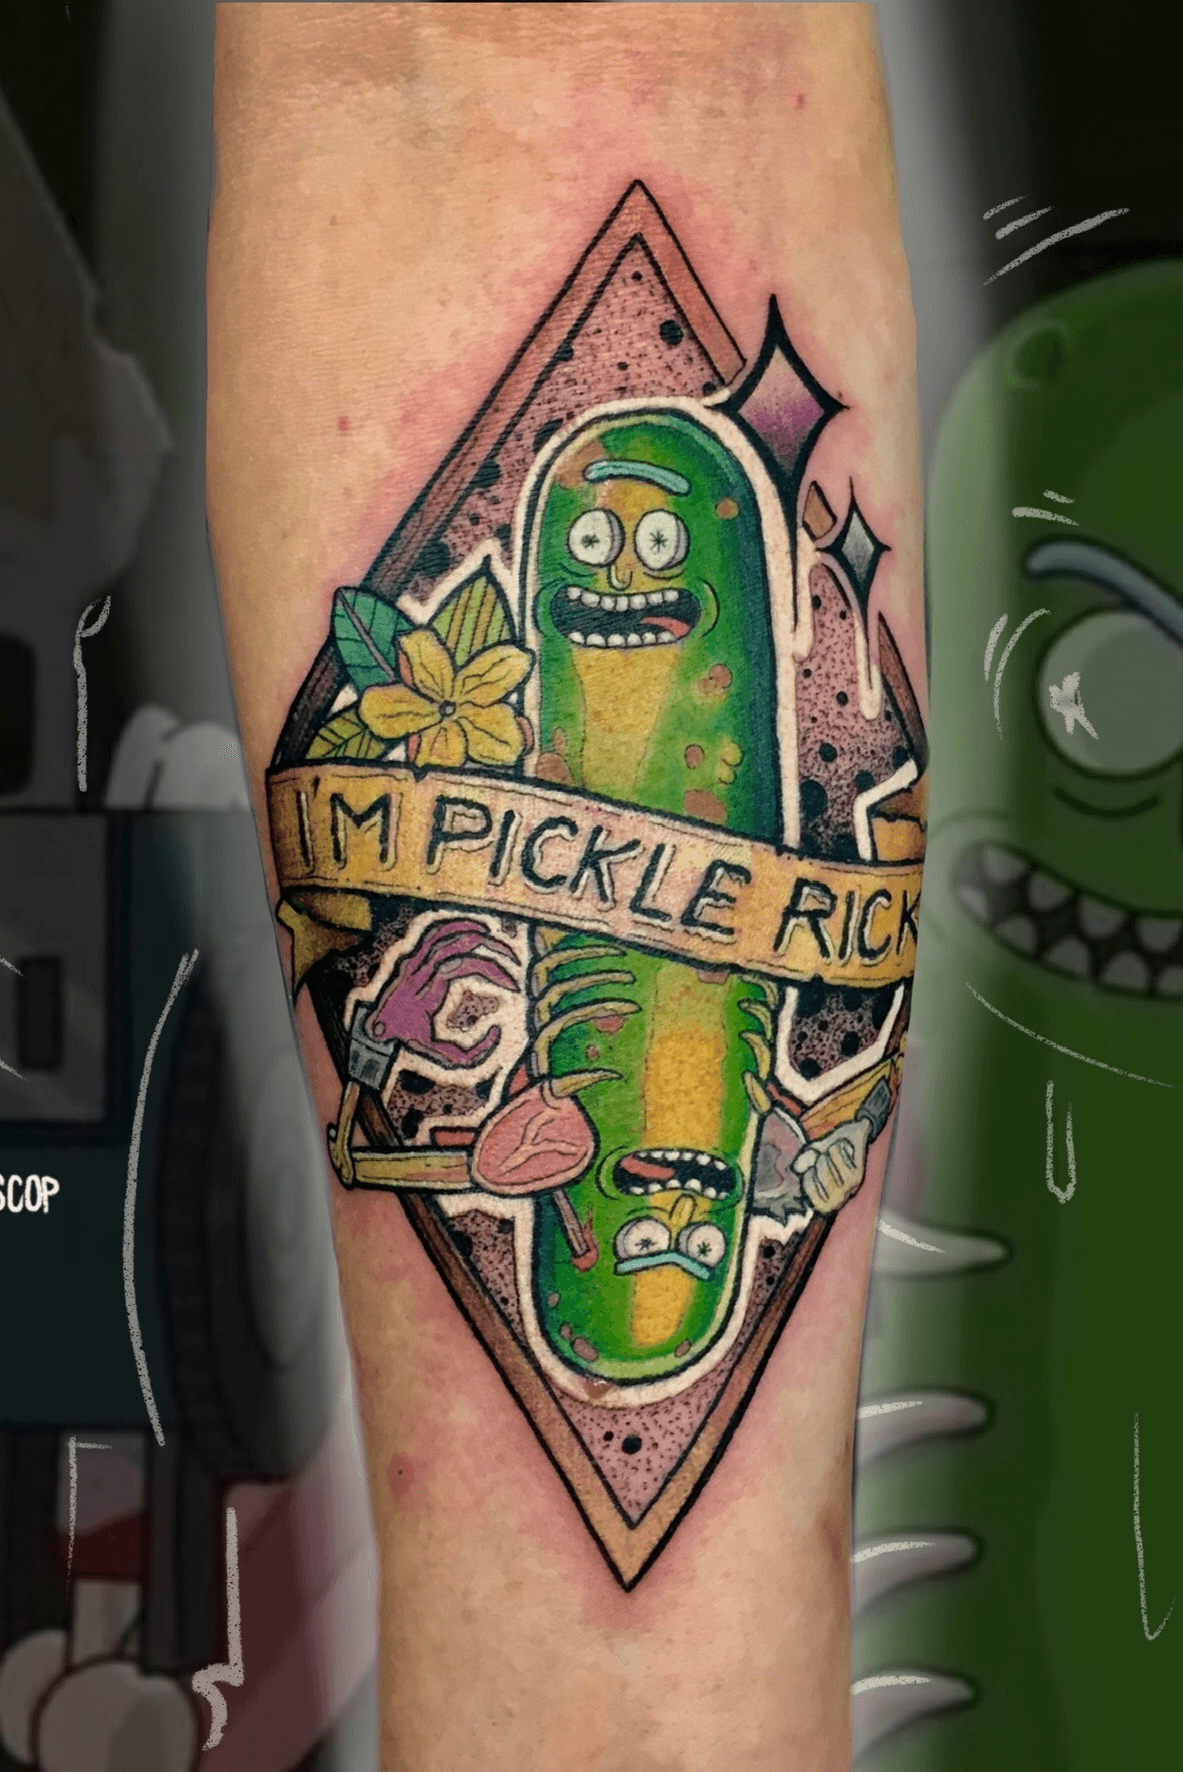 Sellers Ink Tattoo  Pammy just did this cute little pickle tattoo wearing  a diaper and a bow lol this tattoo is for his baby niece whos nickname is  pickle  Facebook